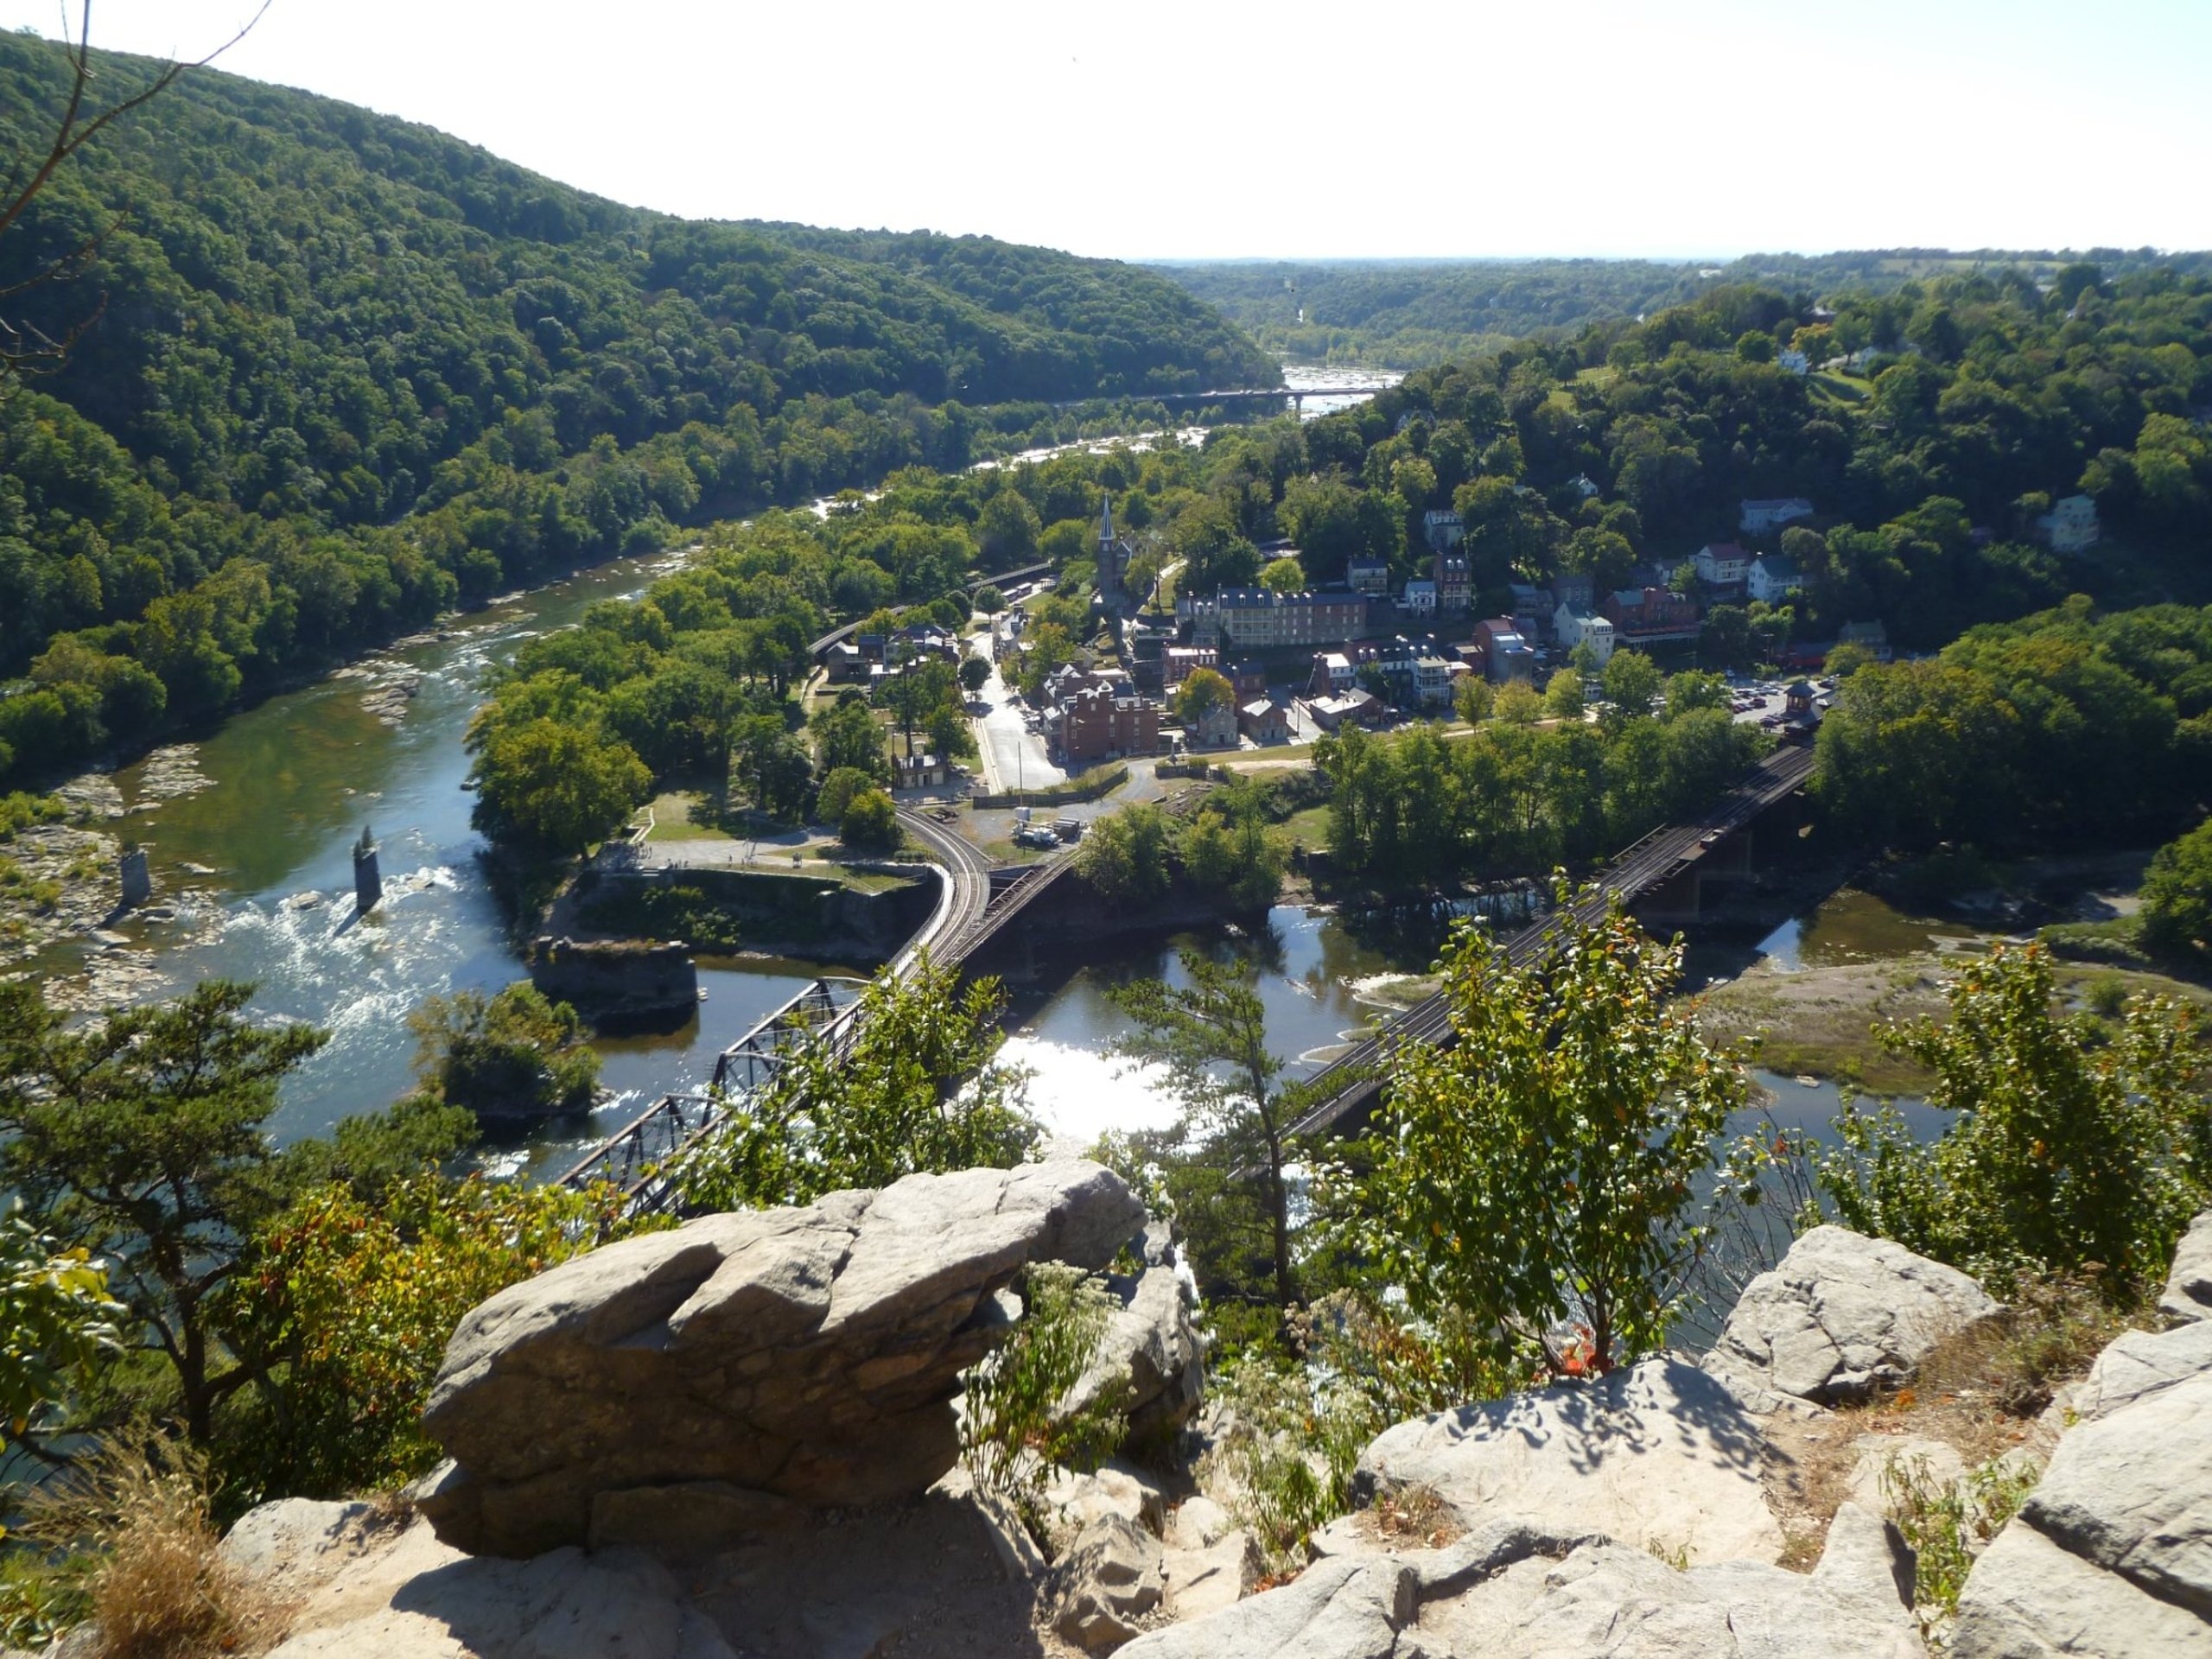 Harpers Ferry reward, Maryland Heights trail, Knoxville trip, Travel photography, 2560x1920 HD Desktop